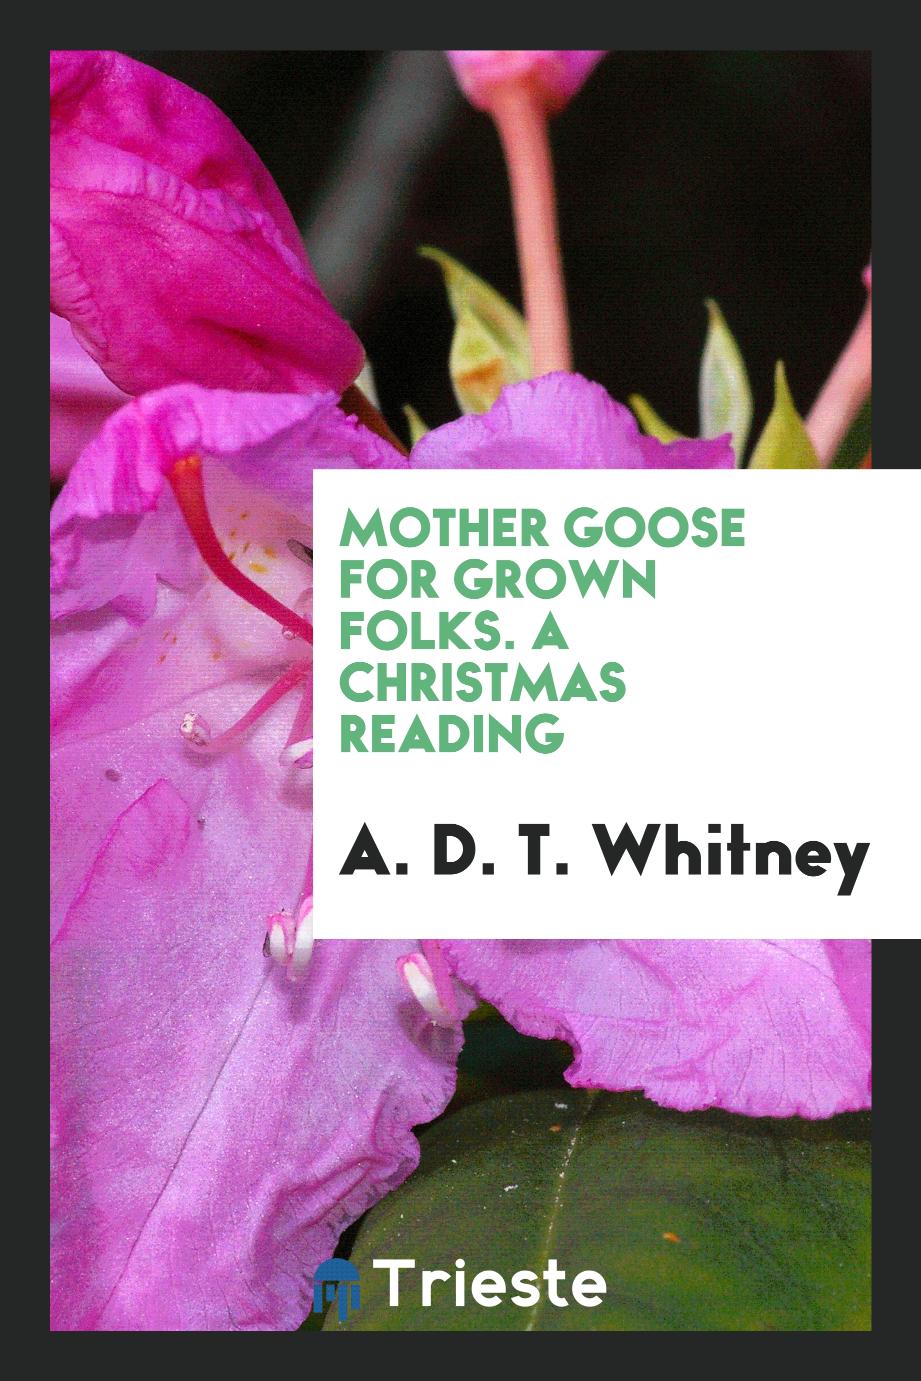 Mother Goose for grown folks. A Christmas reading